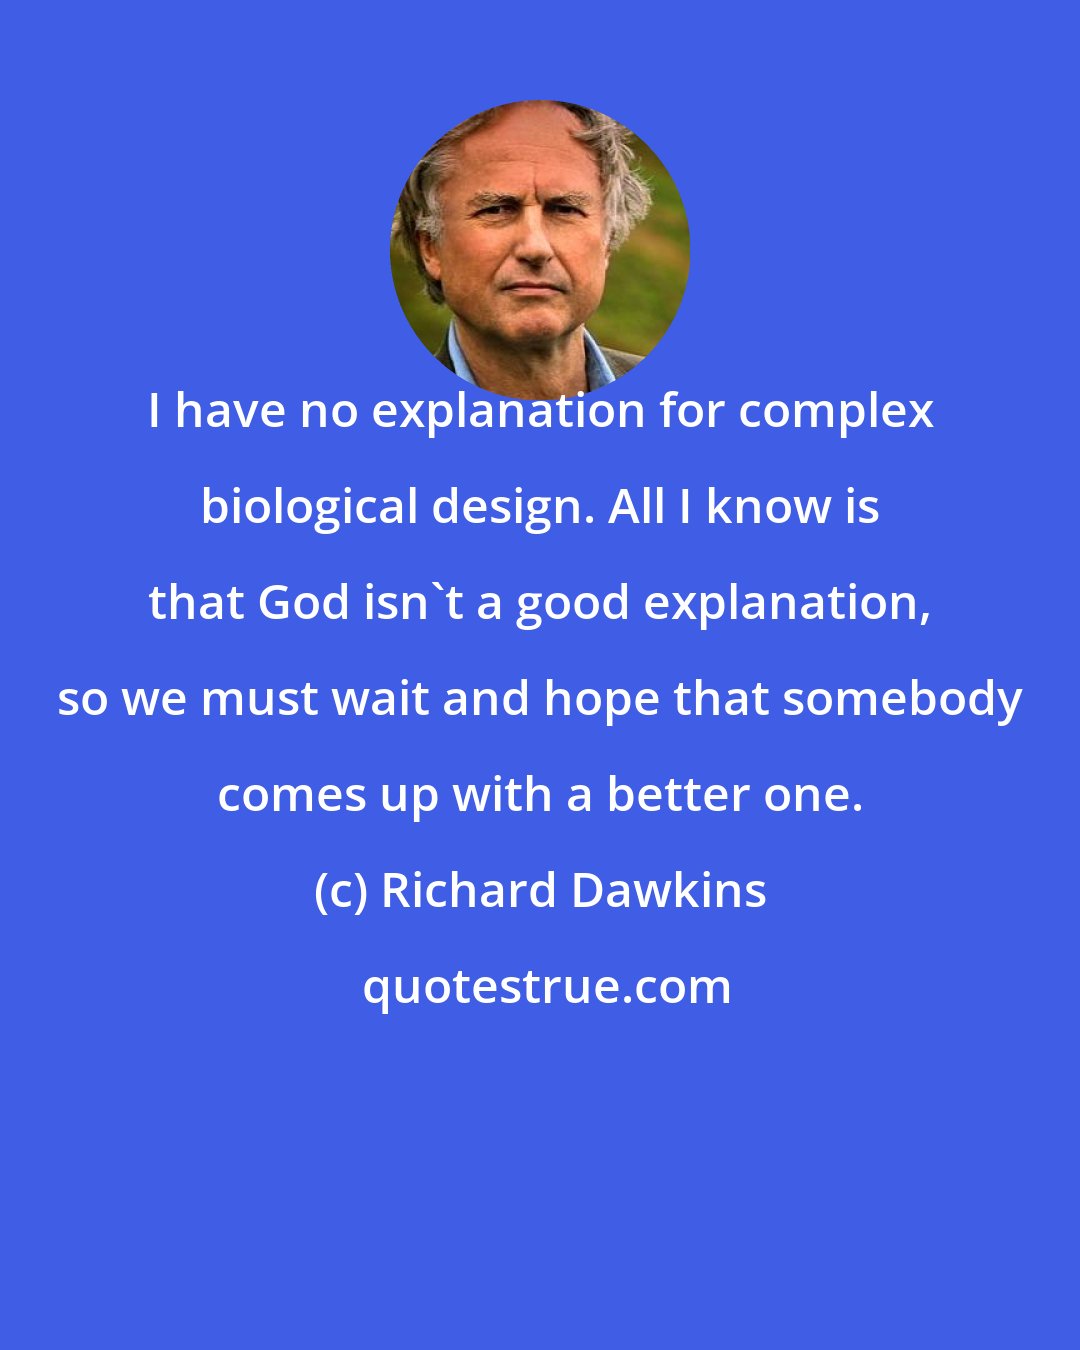 Richard Dawkins: I have no explanation for complex biological design. All I know is that God isn't a good explanation, so we must wait and hope that somebody comes up with a better one.